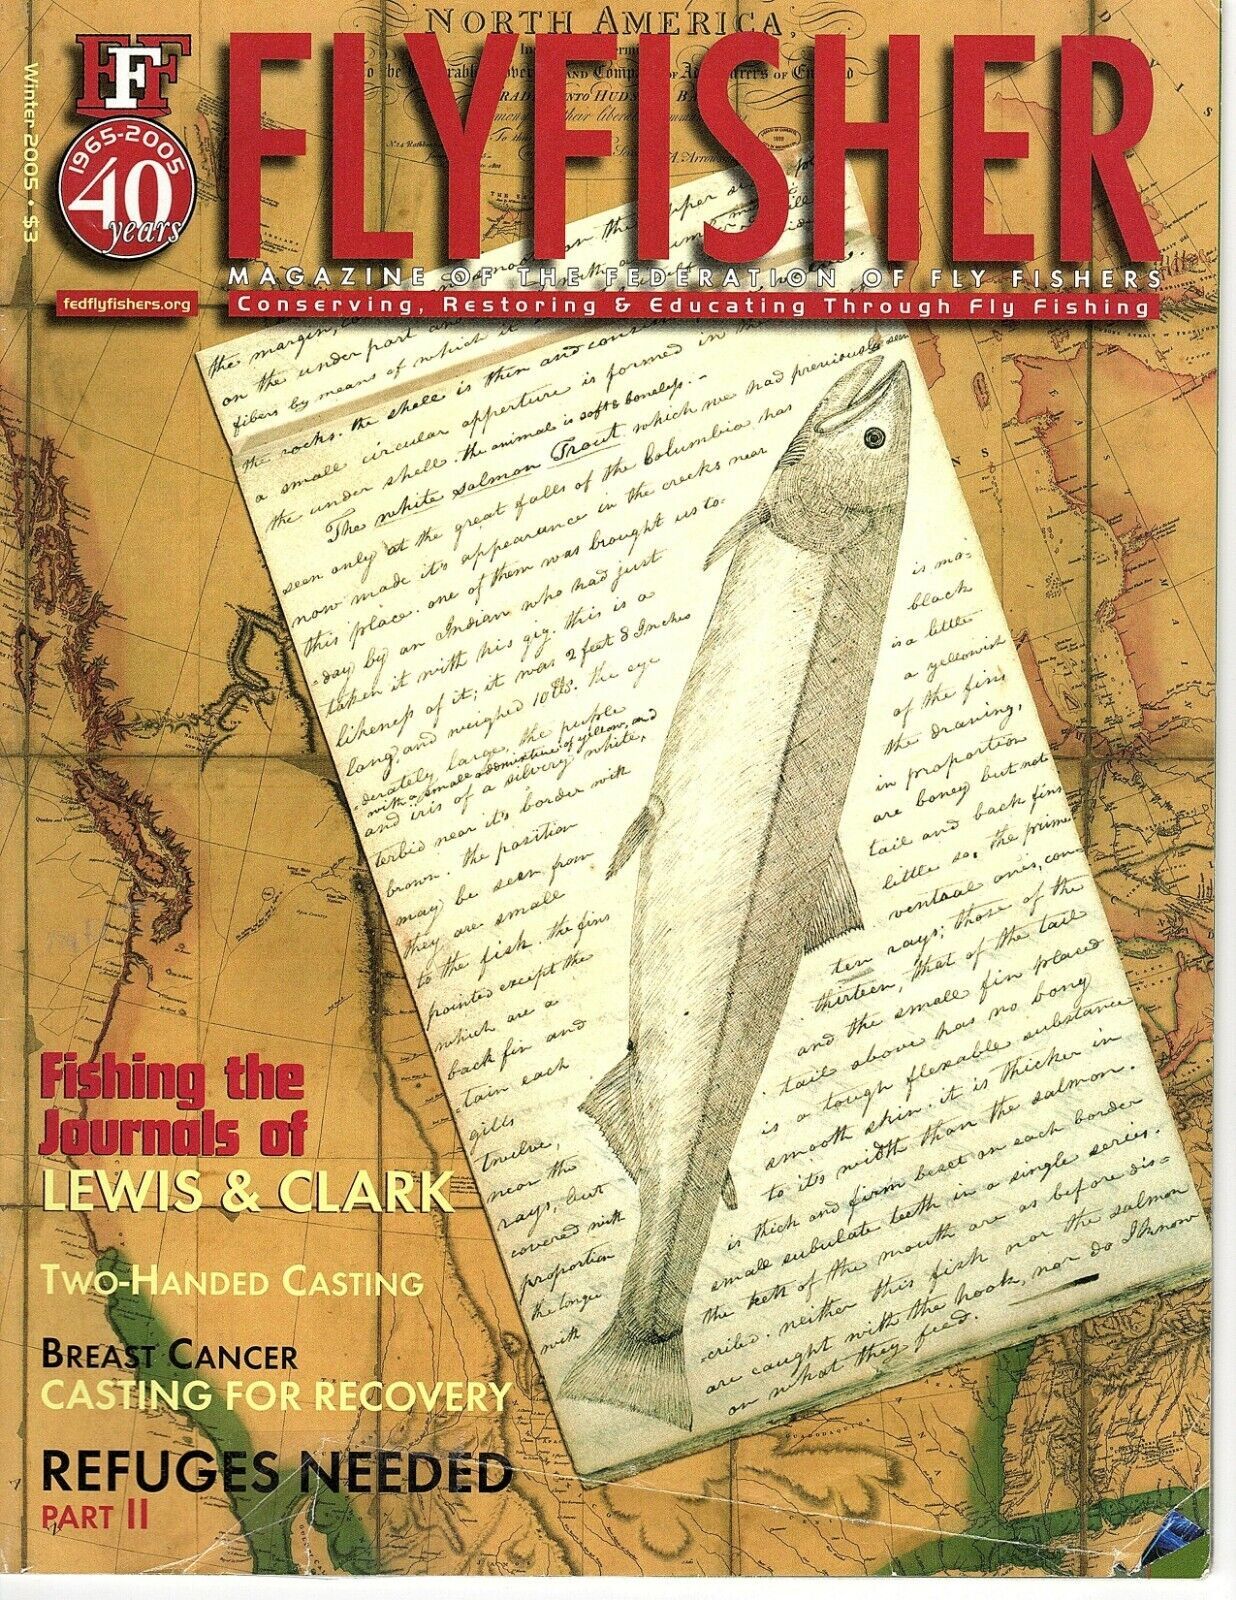 Primary image for FlyFisher Magazine Winter 2005 Fishing Journals of Lewis and Clark